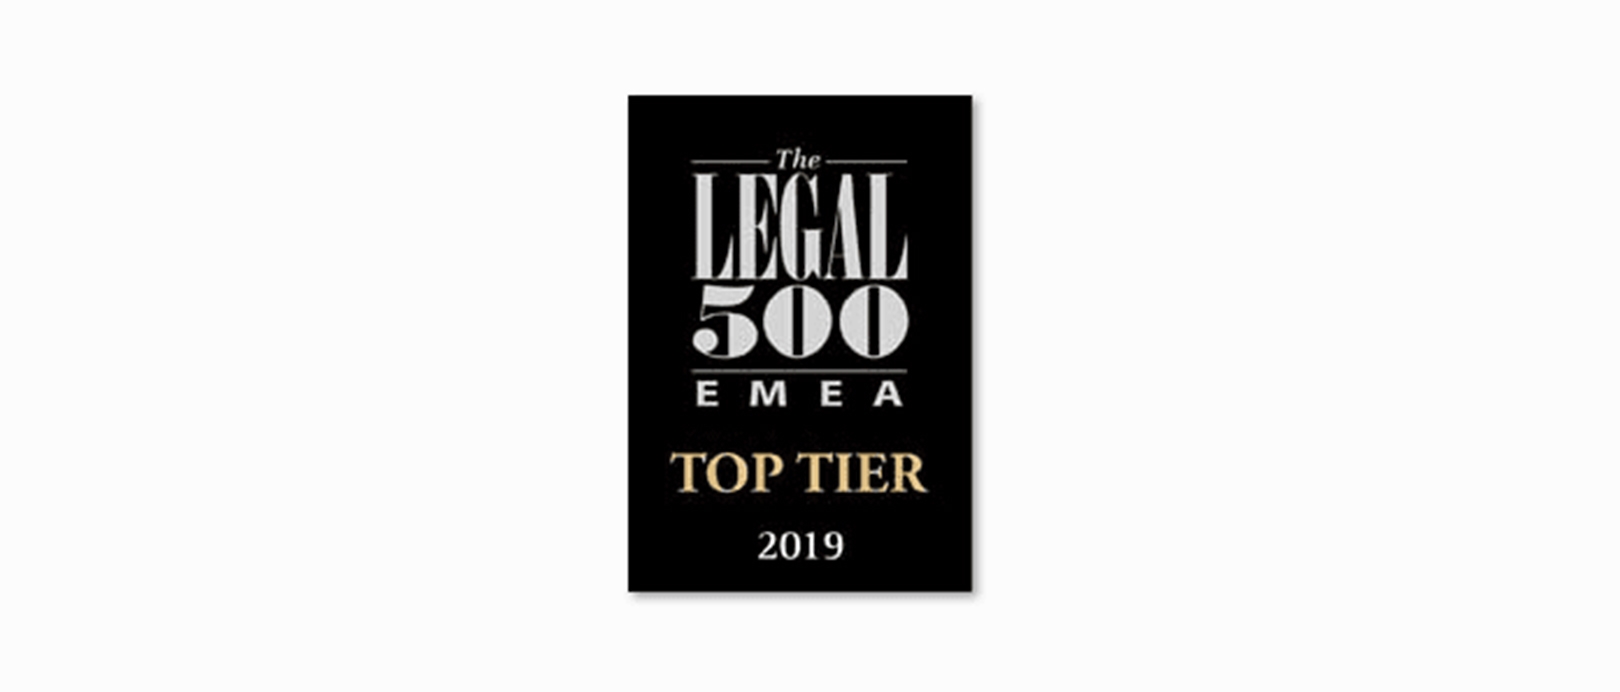 ODILAW named a Tier 1 Firm by Legal 500 in the 2019 EMEA edition